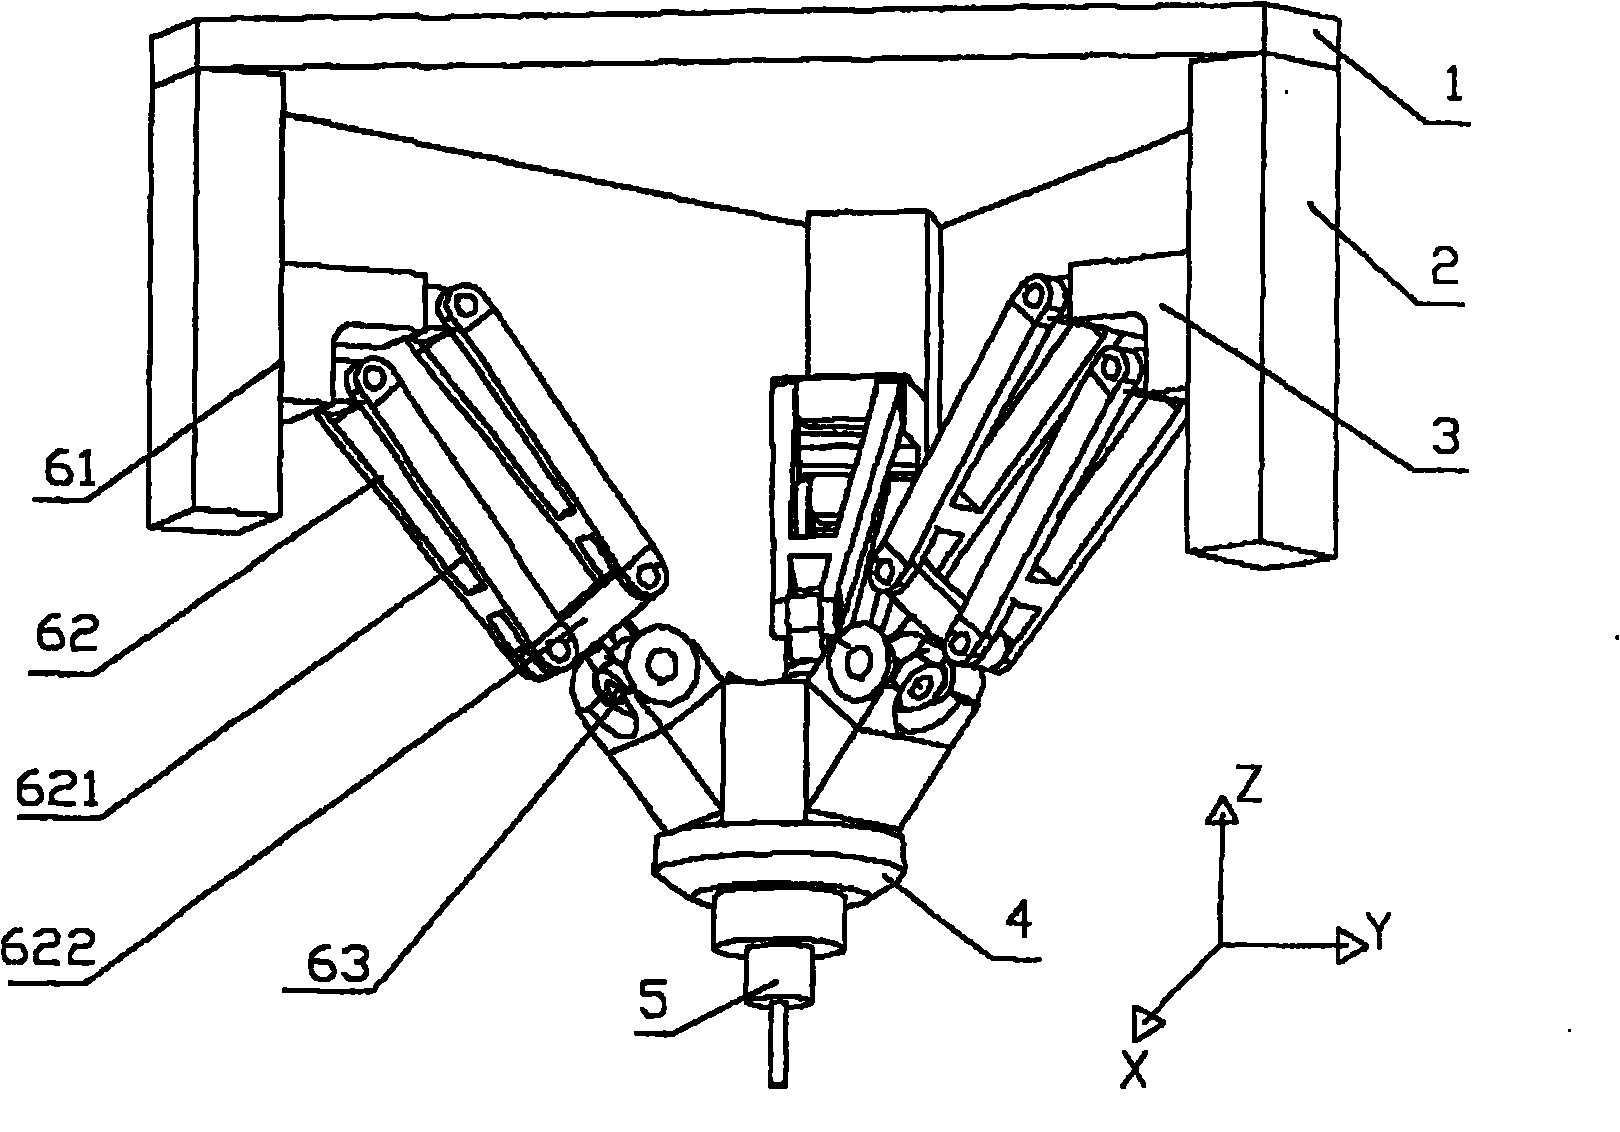 Parallel type three-axis main-shaft head structure